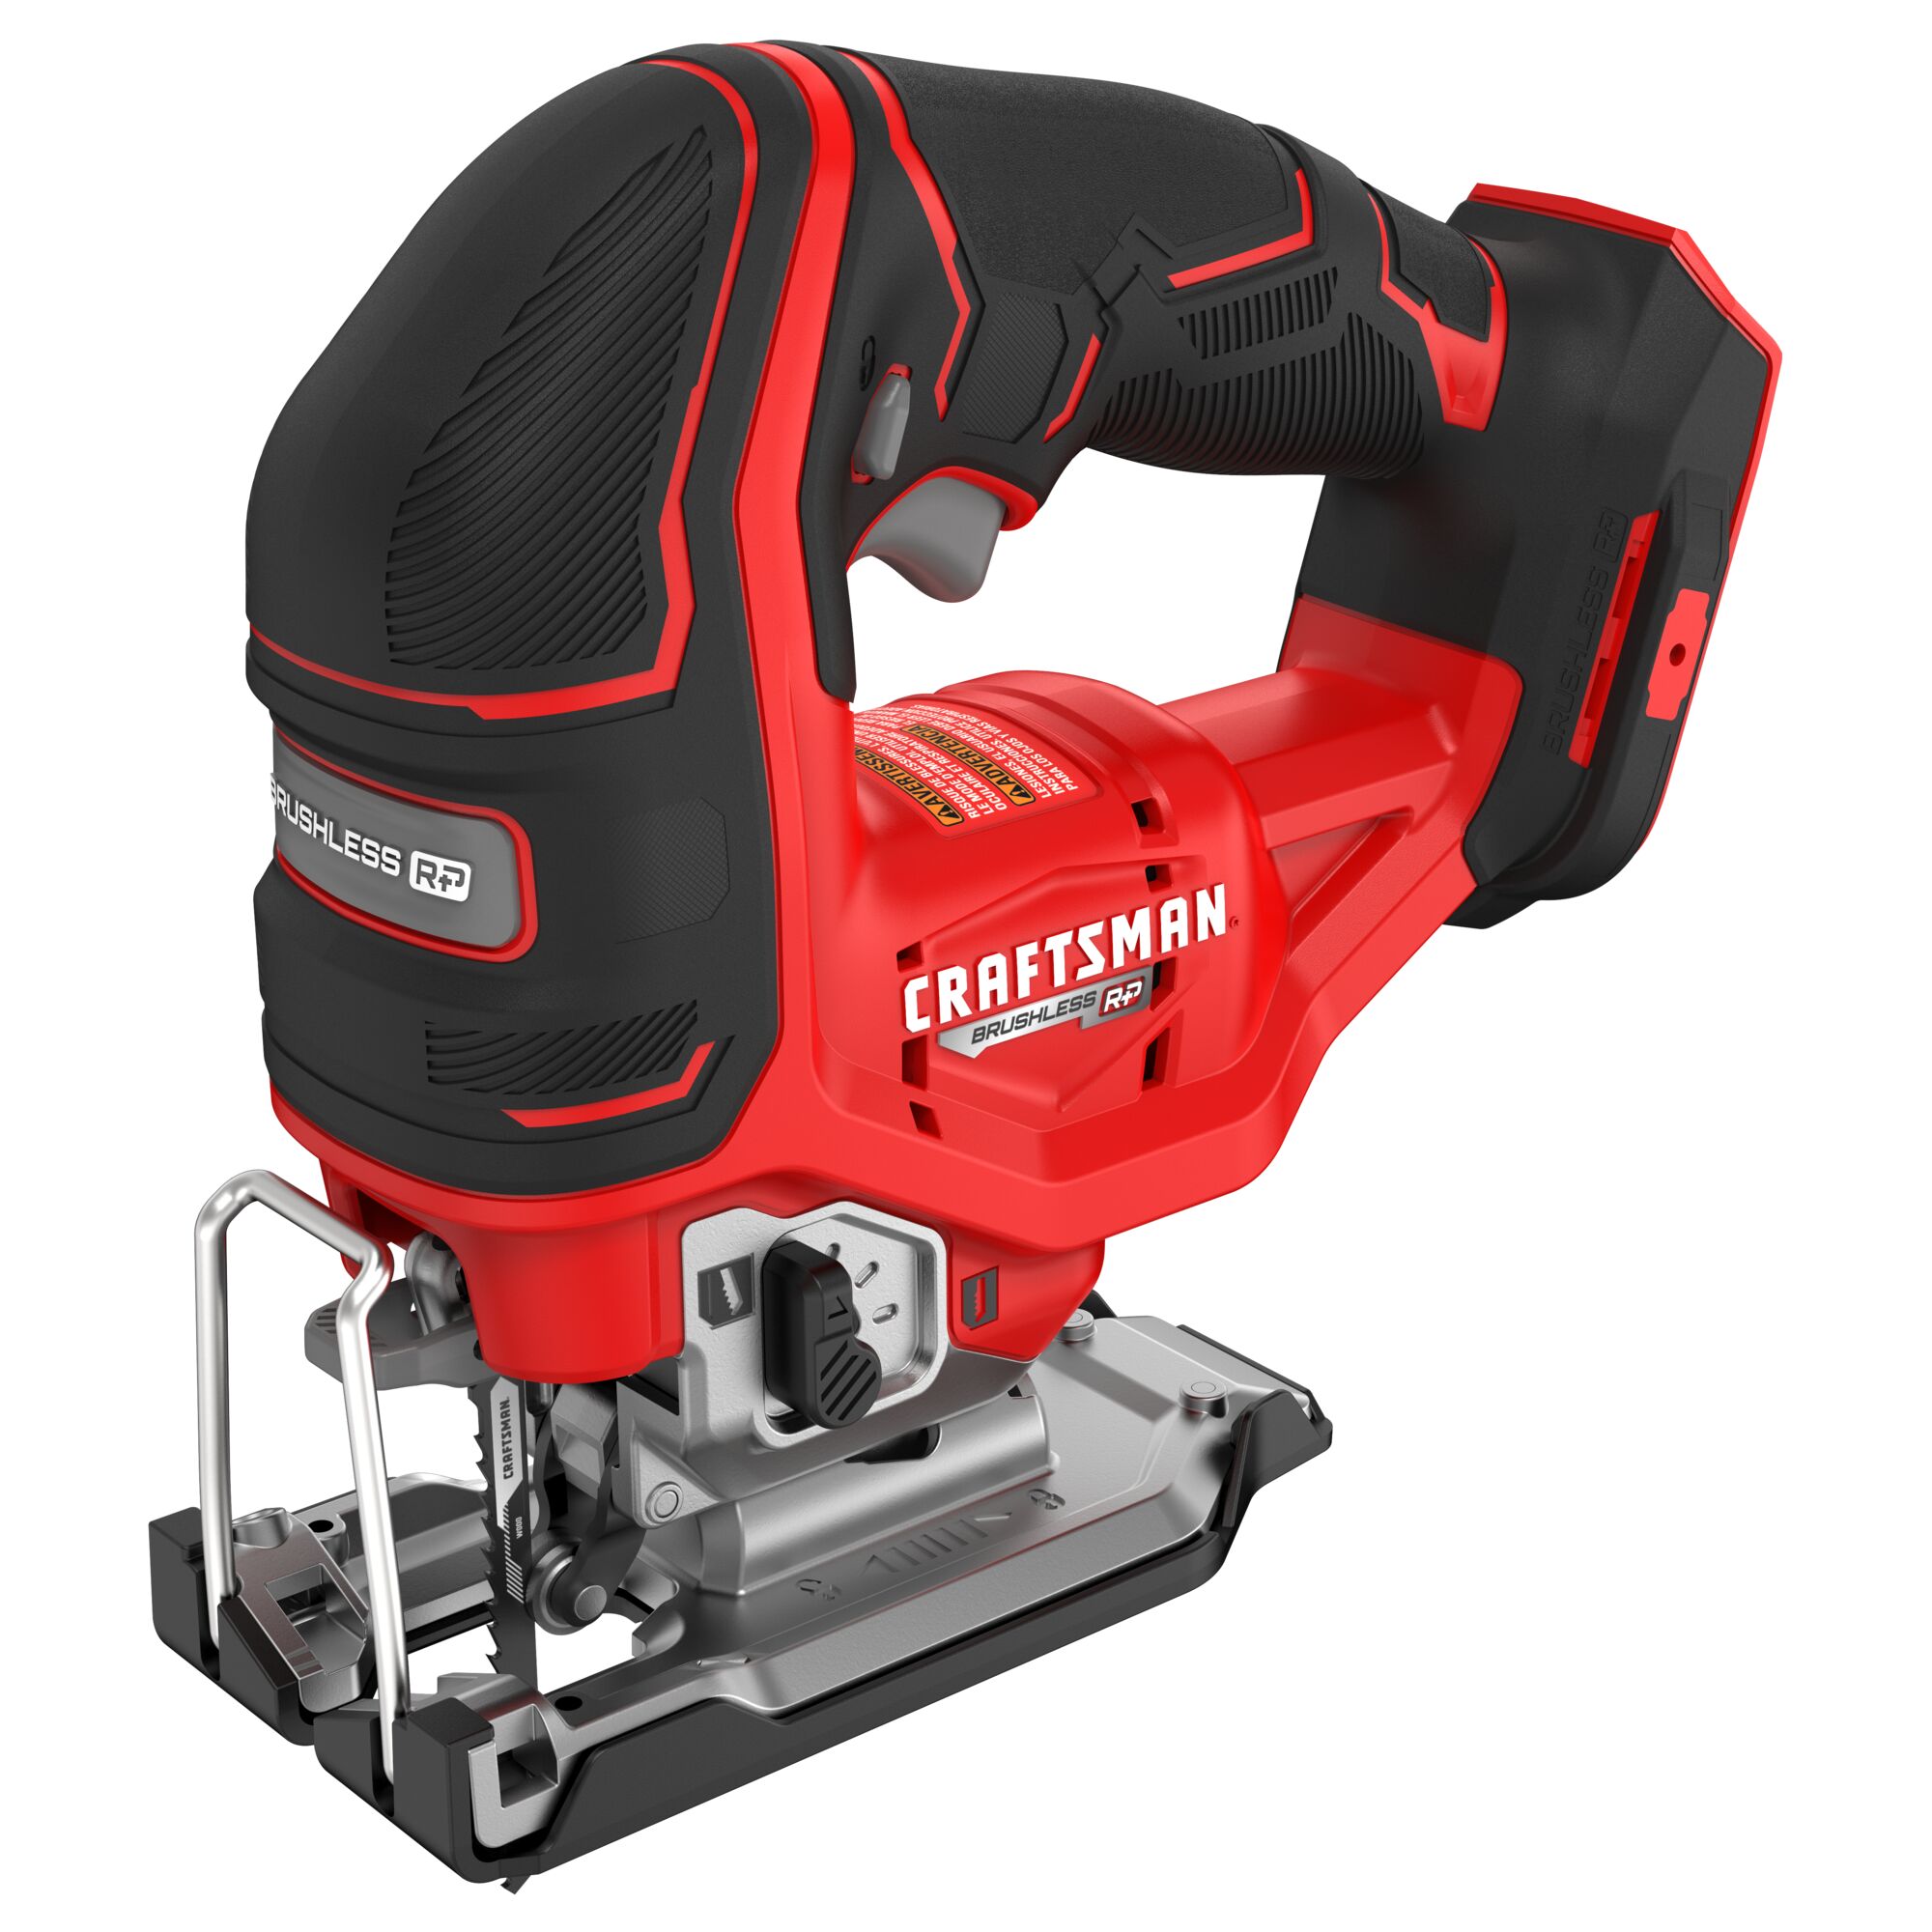 View of CRAFTSMAN Jig Saw on white background